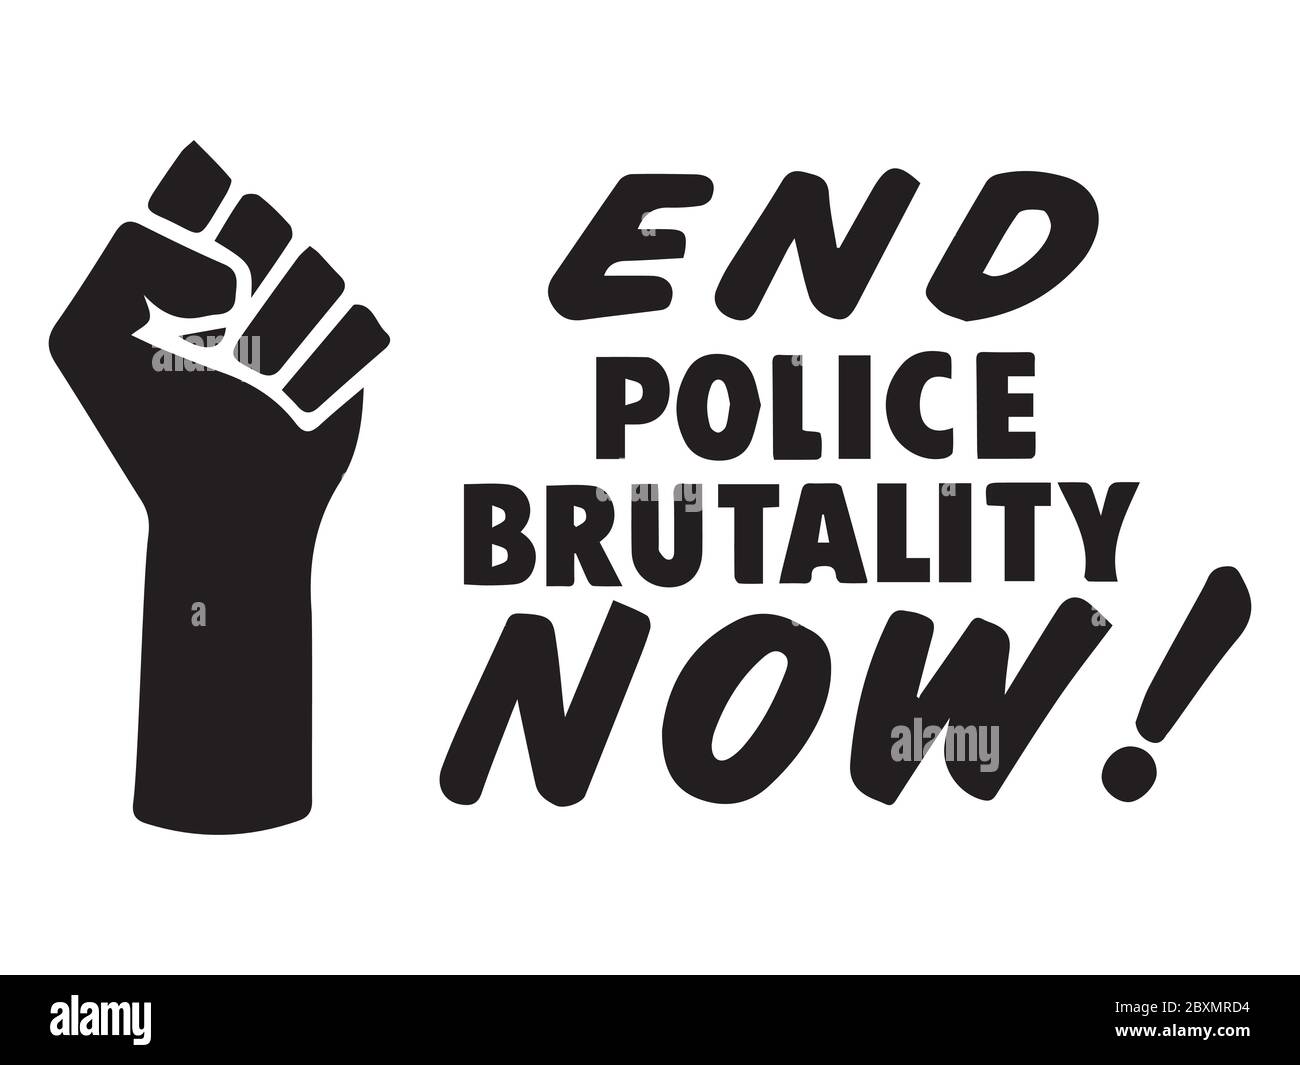 End Police Brutality Now Text with Fist. Illustration depicting End Police Brutality Now with BLM Fist. Black Lives Matter. Black and White EPS Vector Stock Vector